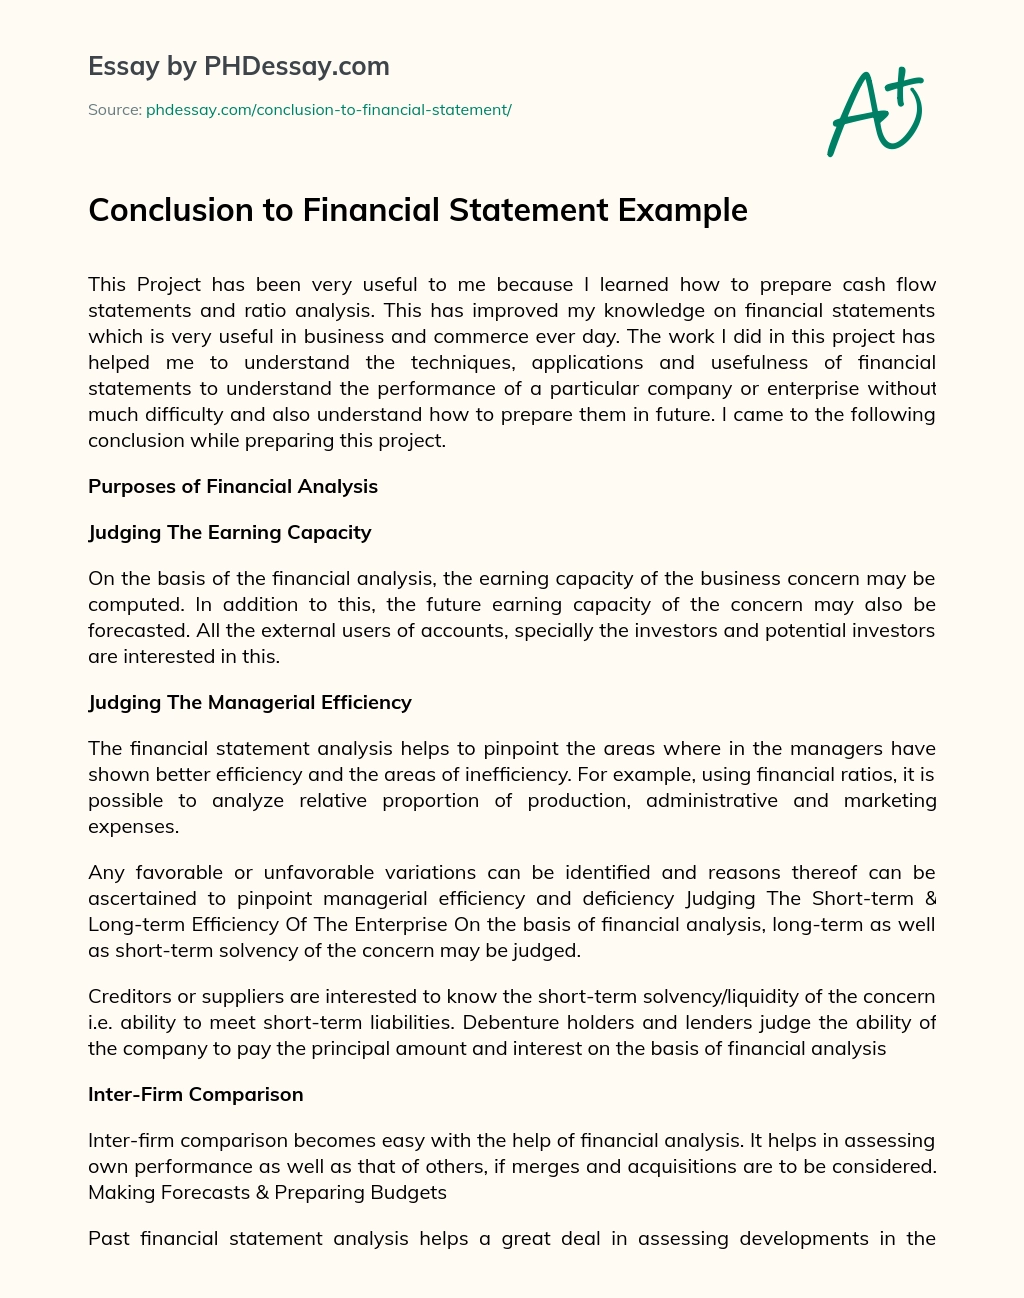 Conclusion to Financial Statement Example essay